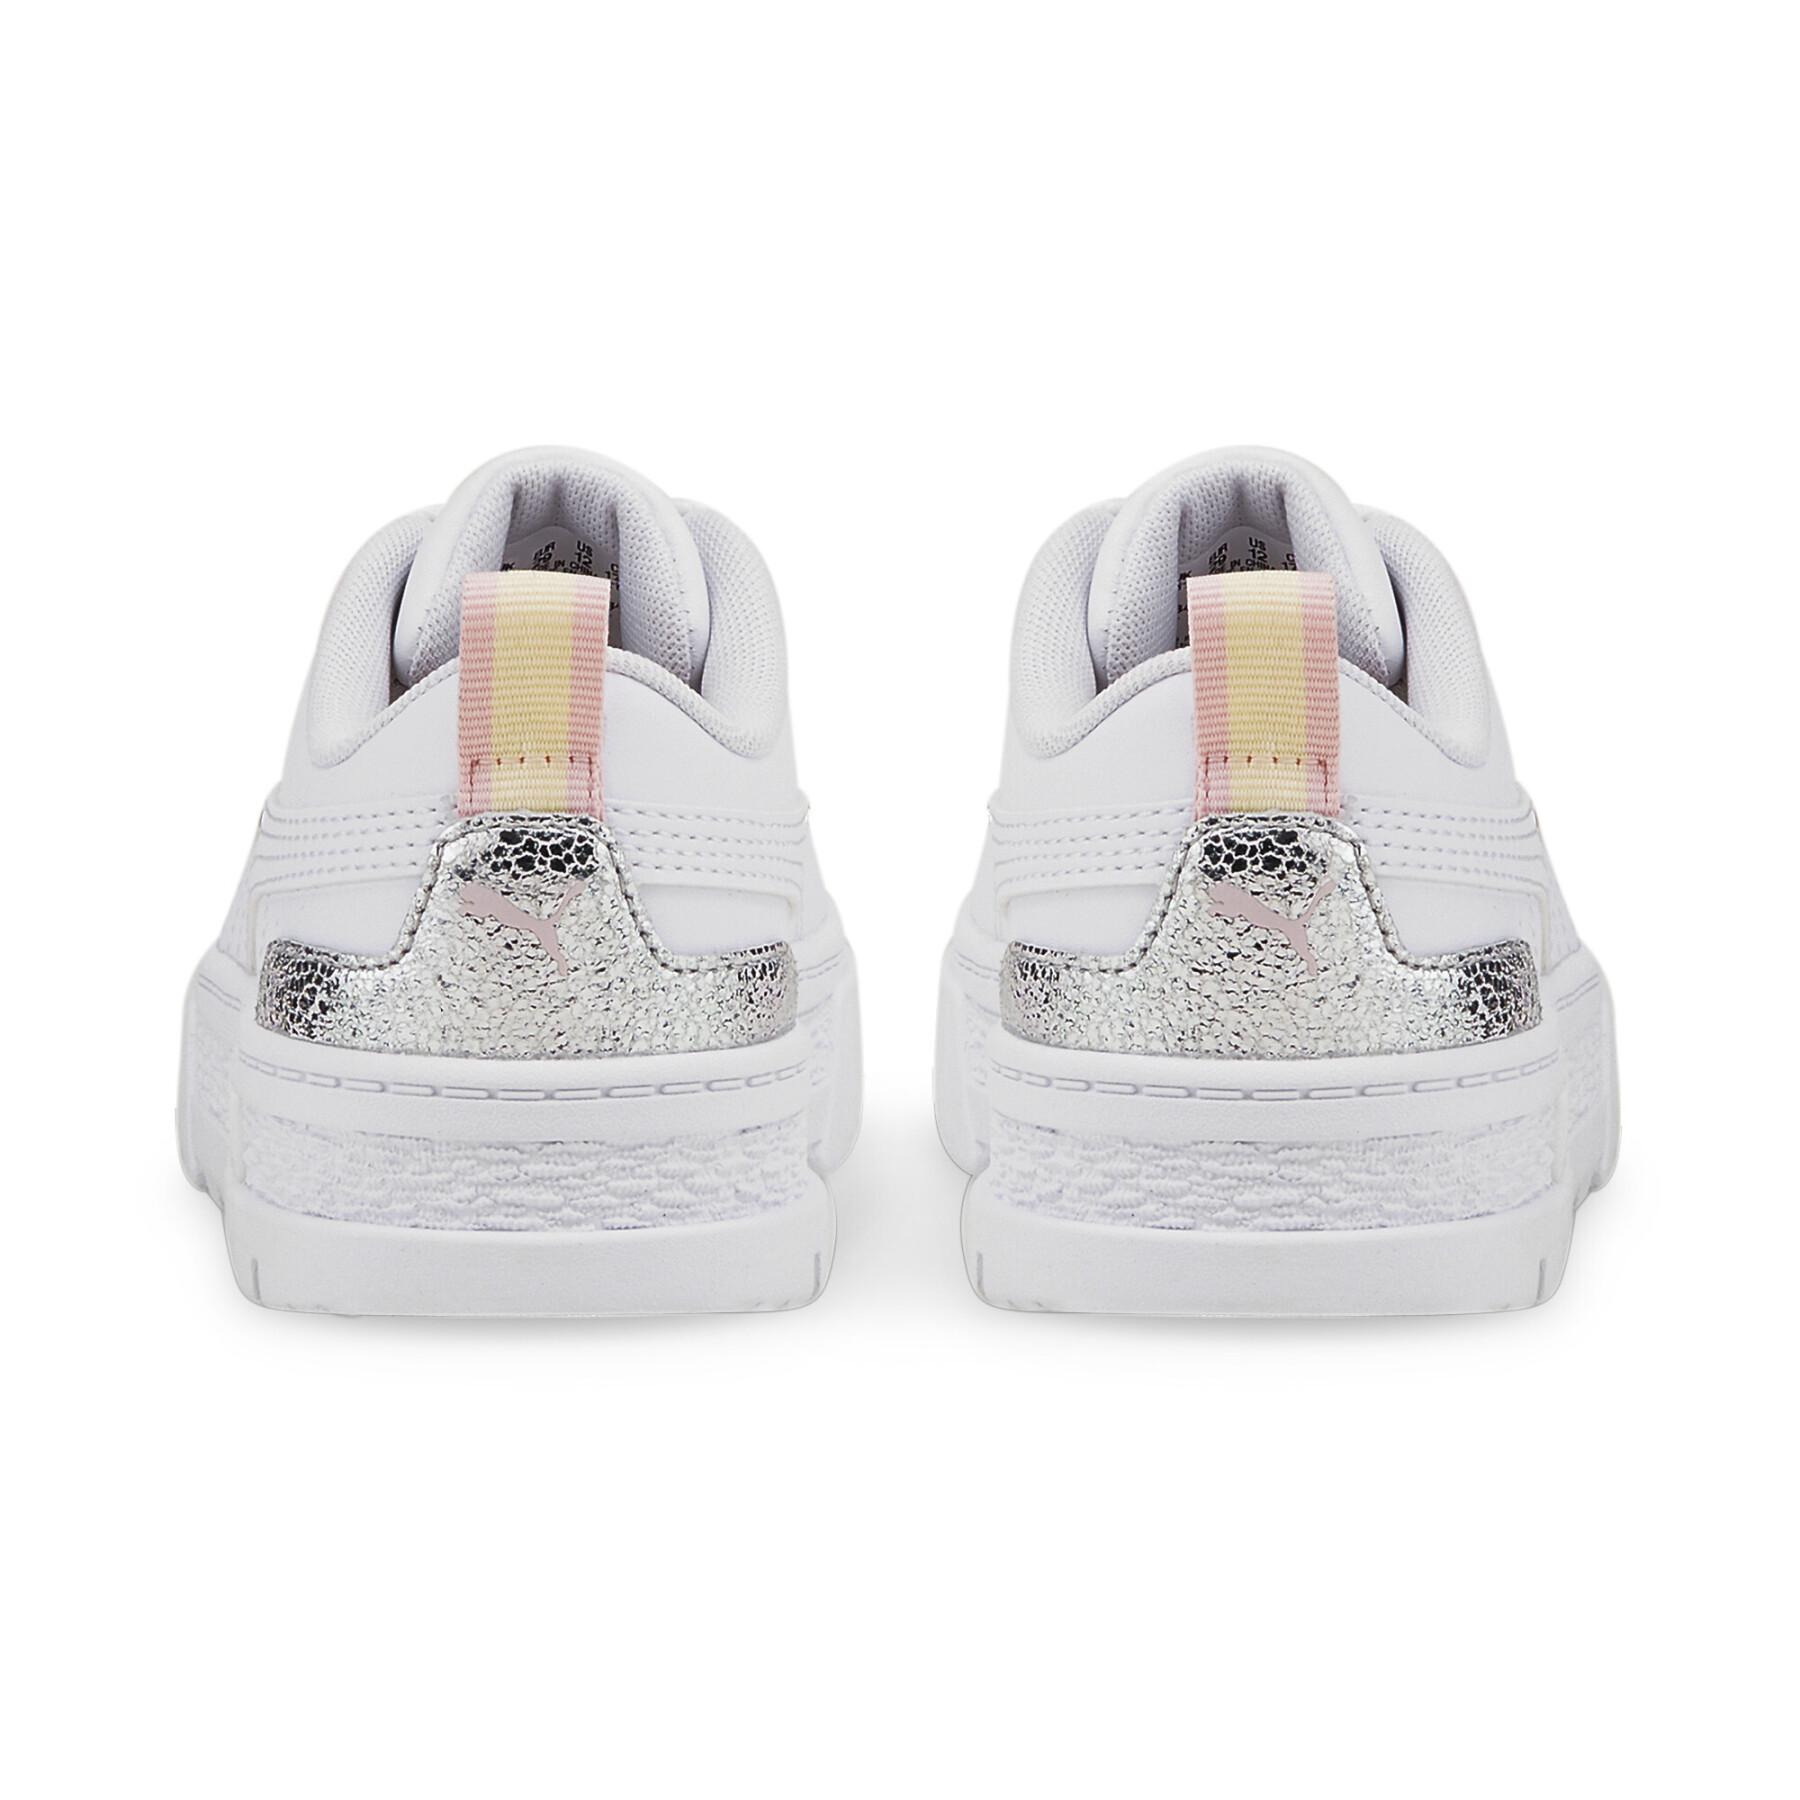 Chaussures fille Puma Mayze Shiny PS